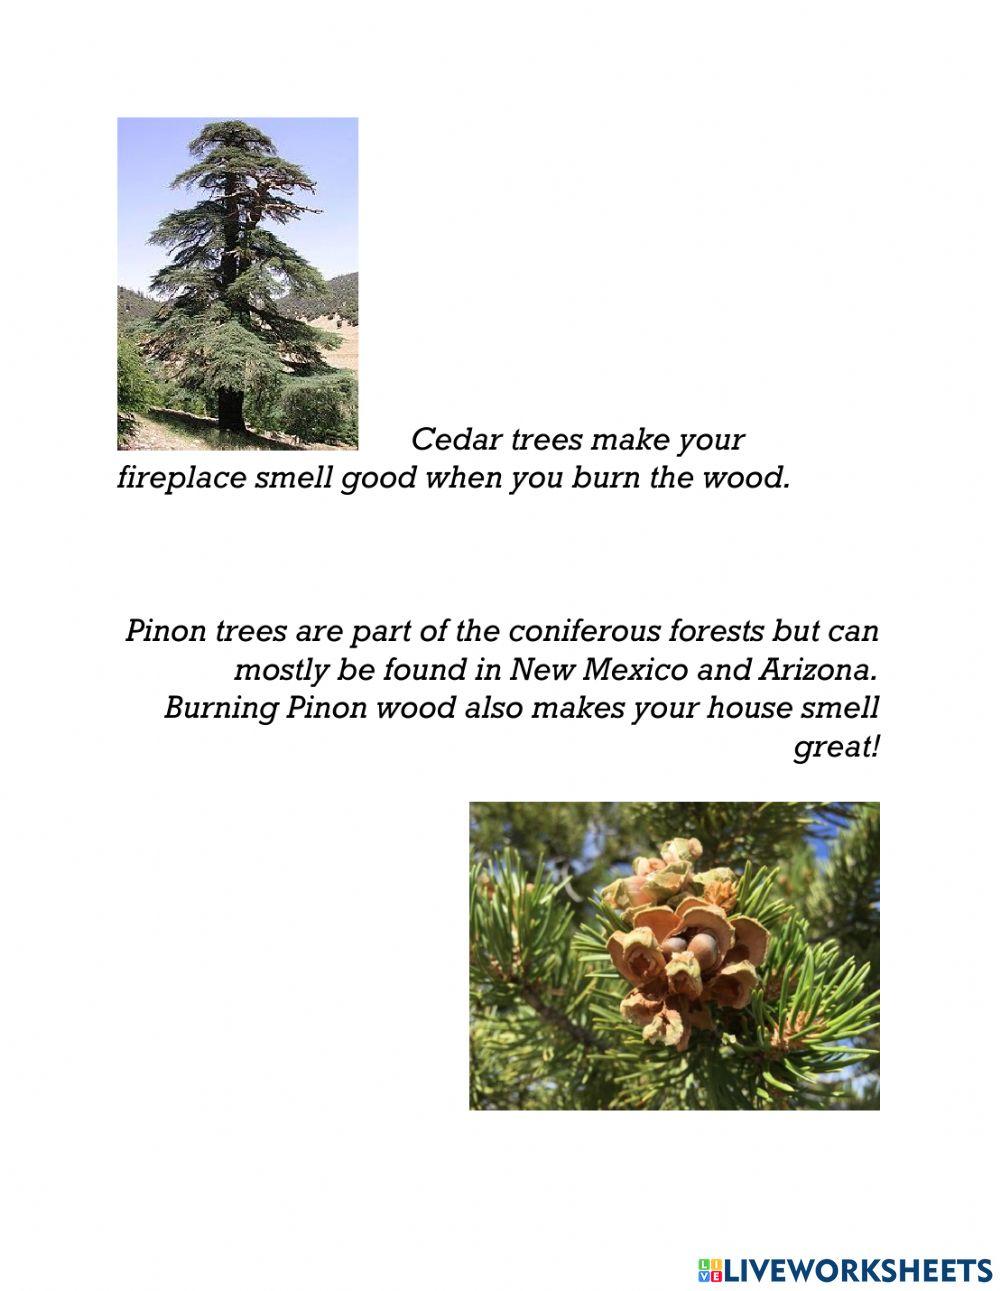 Interesting Parts of a Coniferous Forests